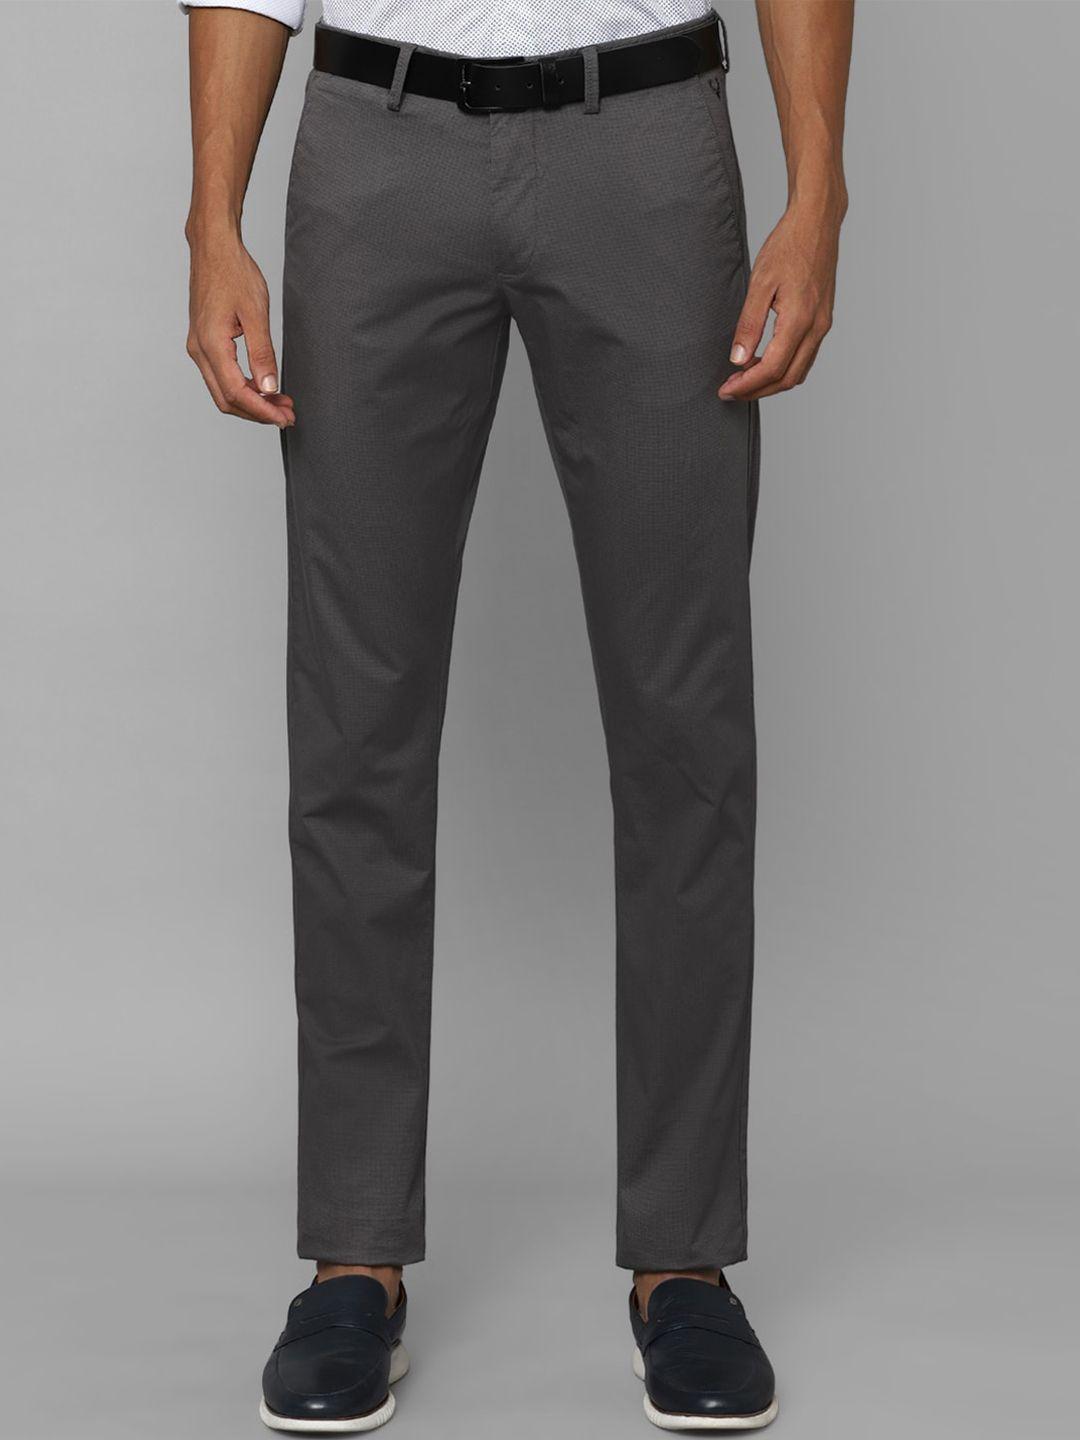 allen solly men textured tailored slim fit casual trousers